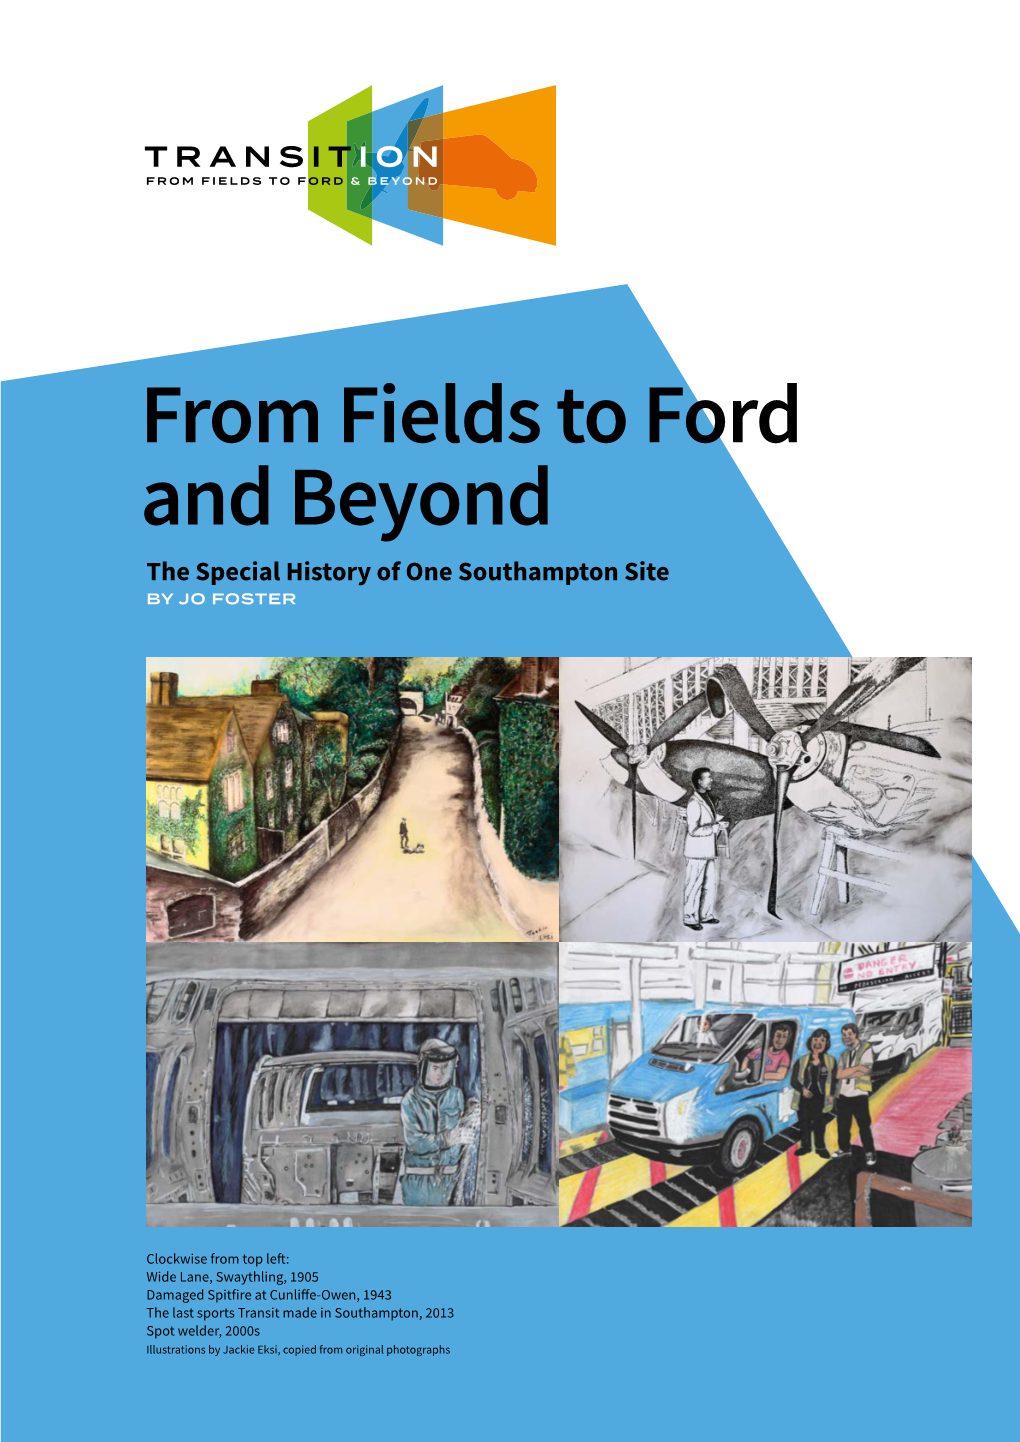 From Fields to Ford and Beyond the Special History of One Southampton Site by JO FOSTER